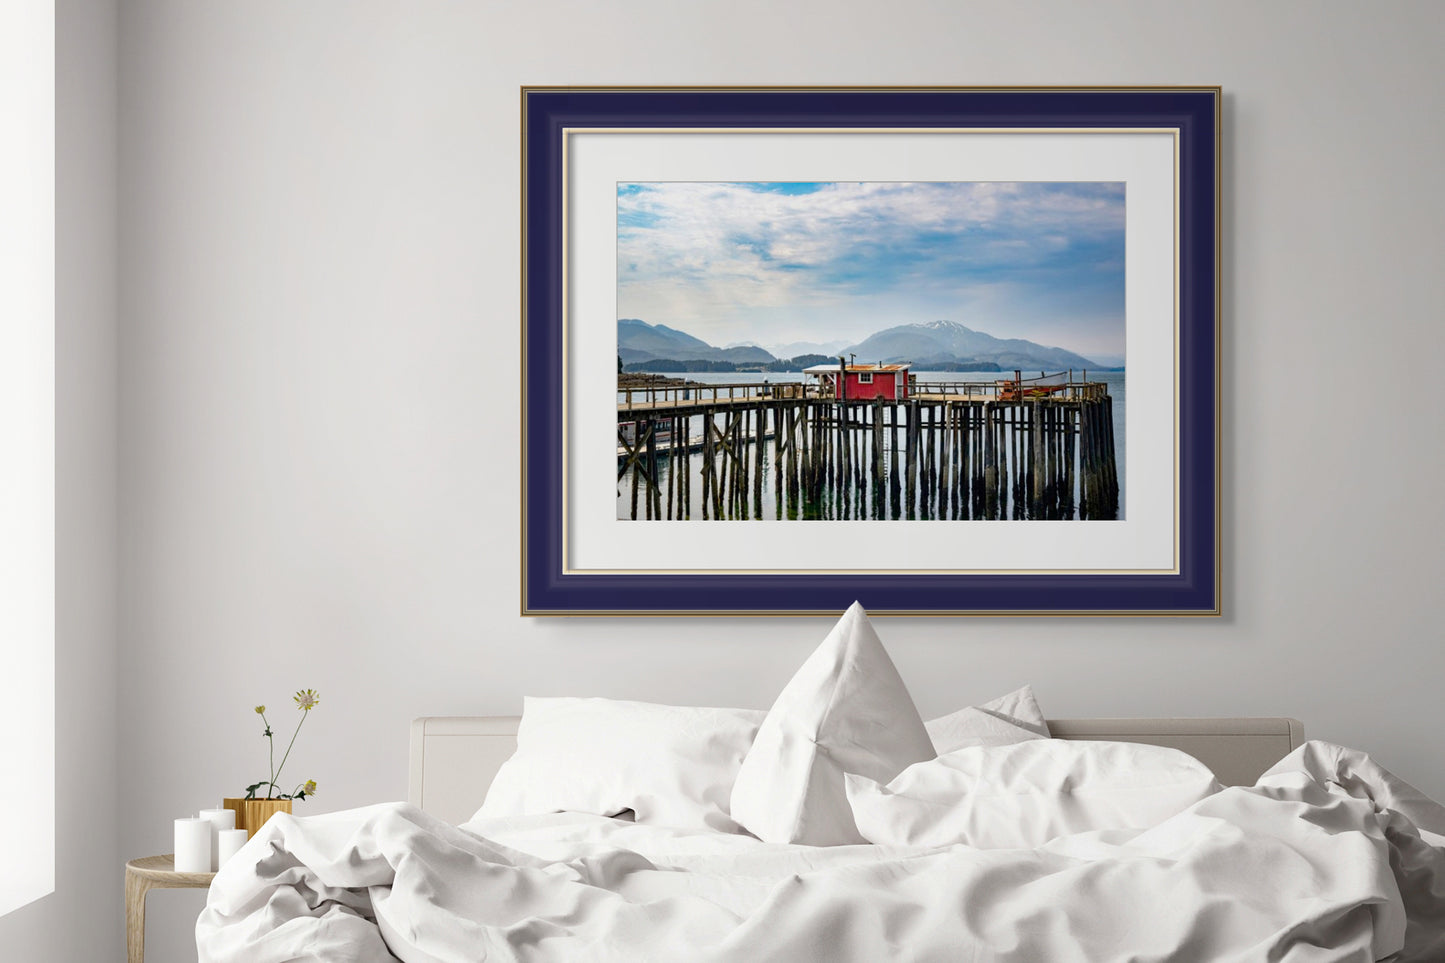 Title:    The Docks of Icy Strait